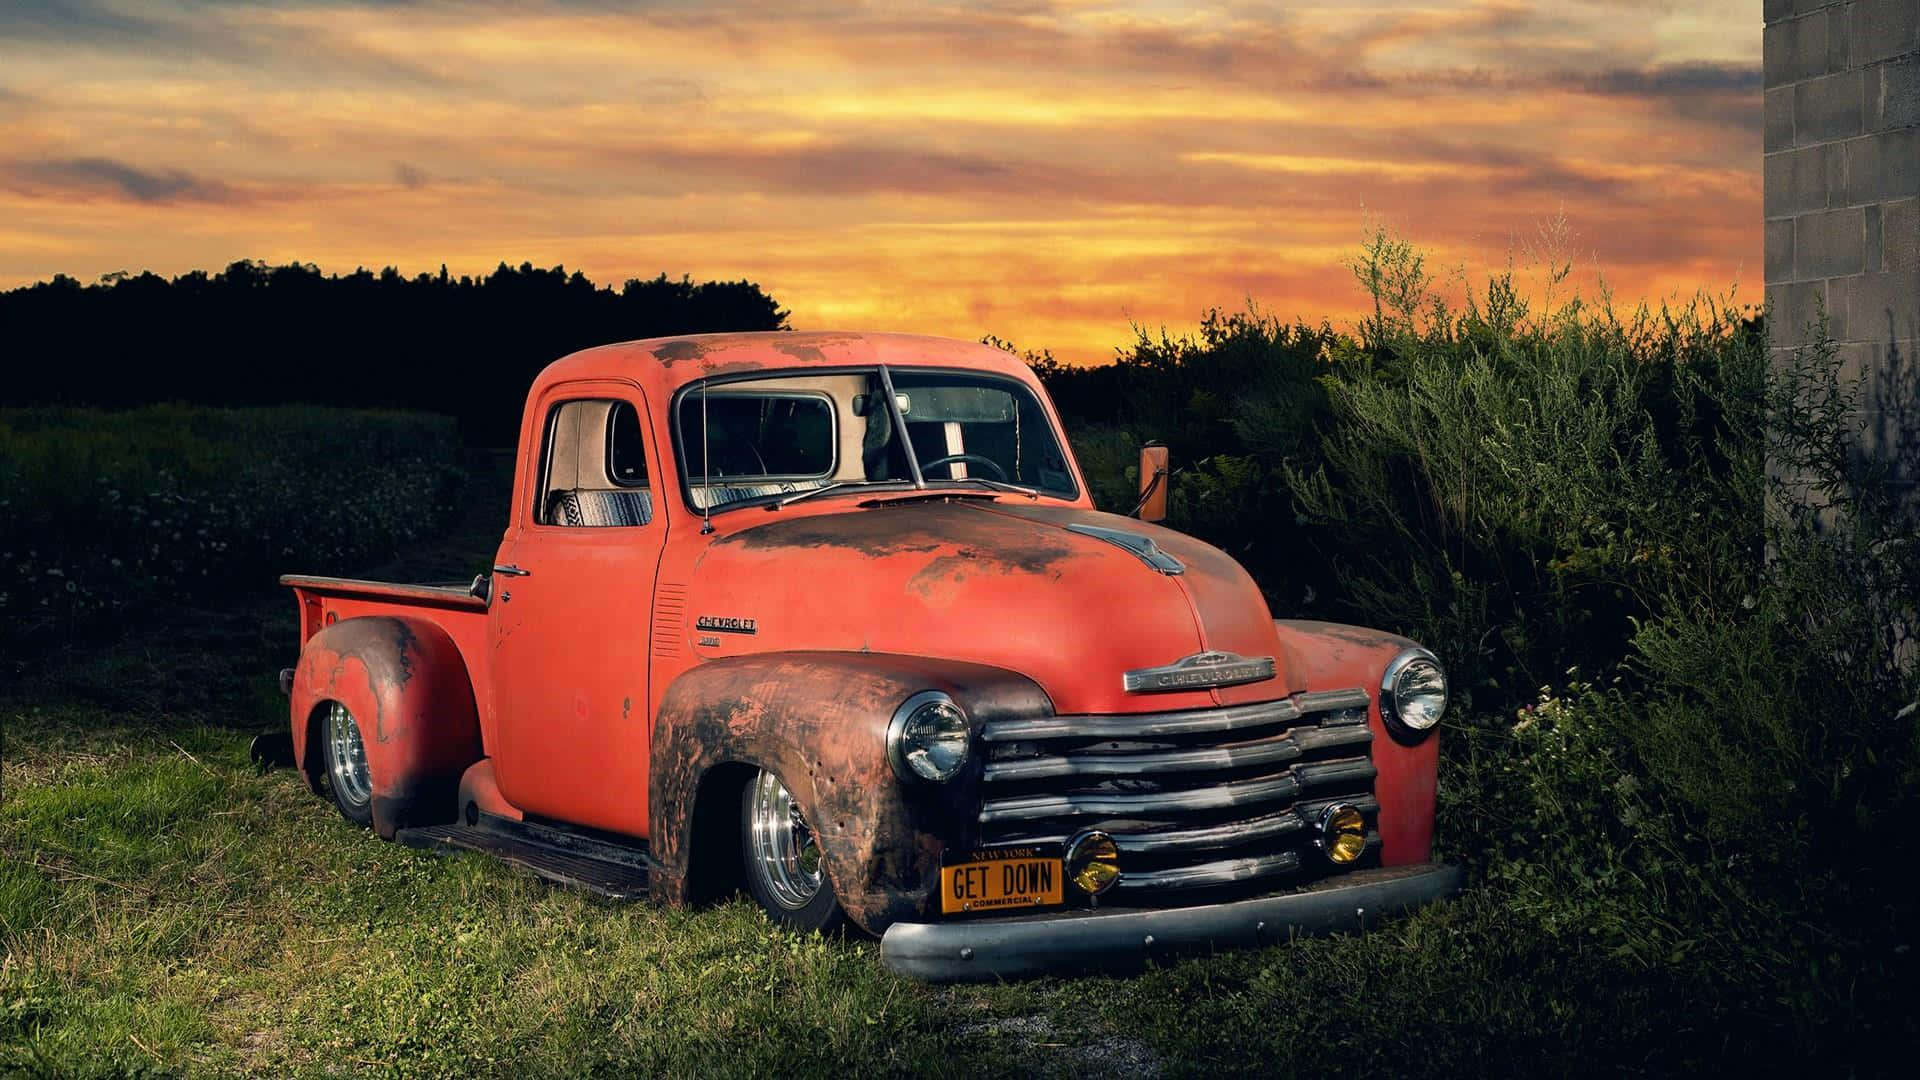 An Old Red Truck In The Grass